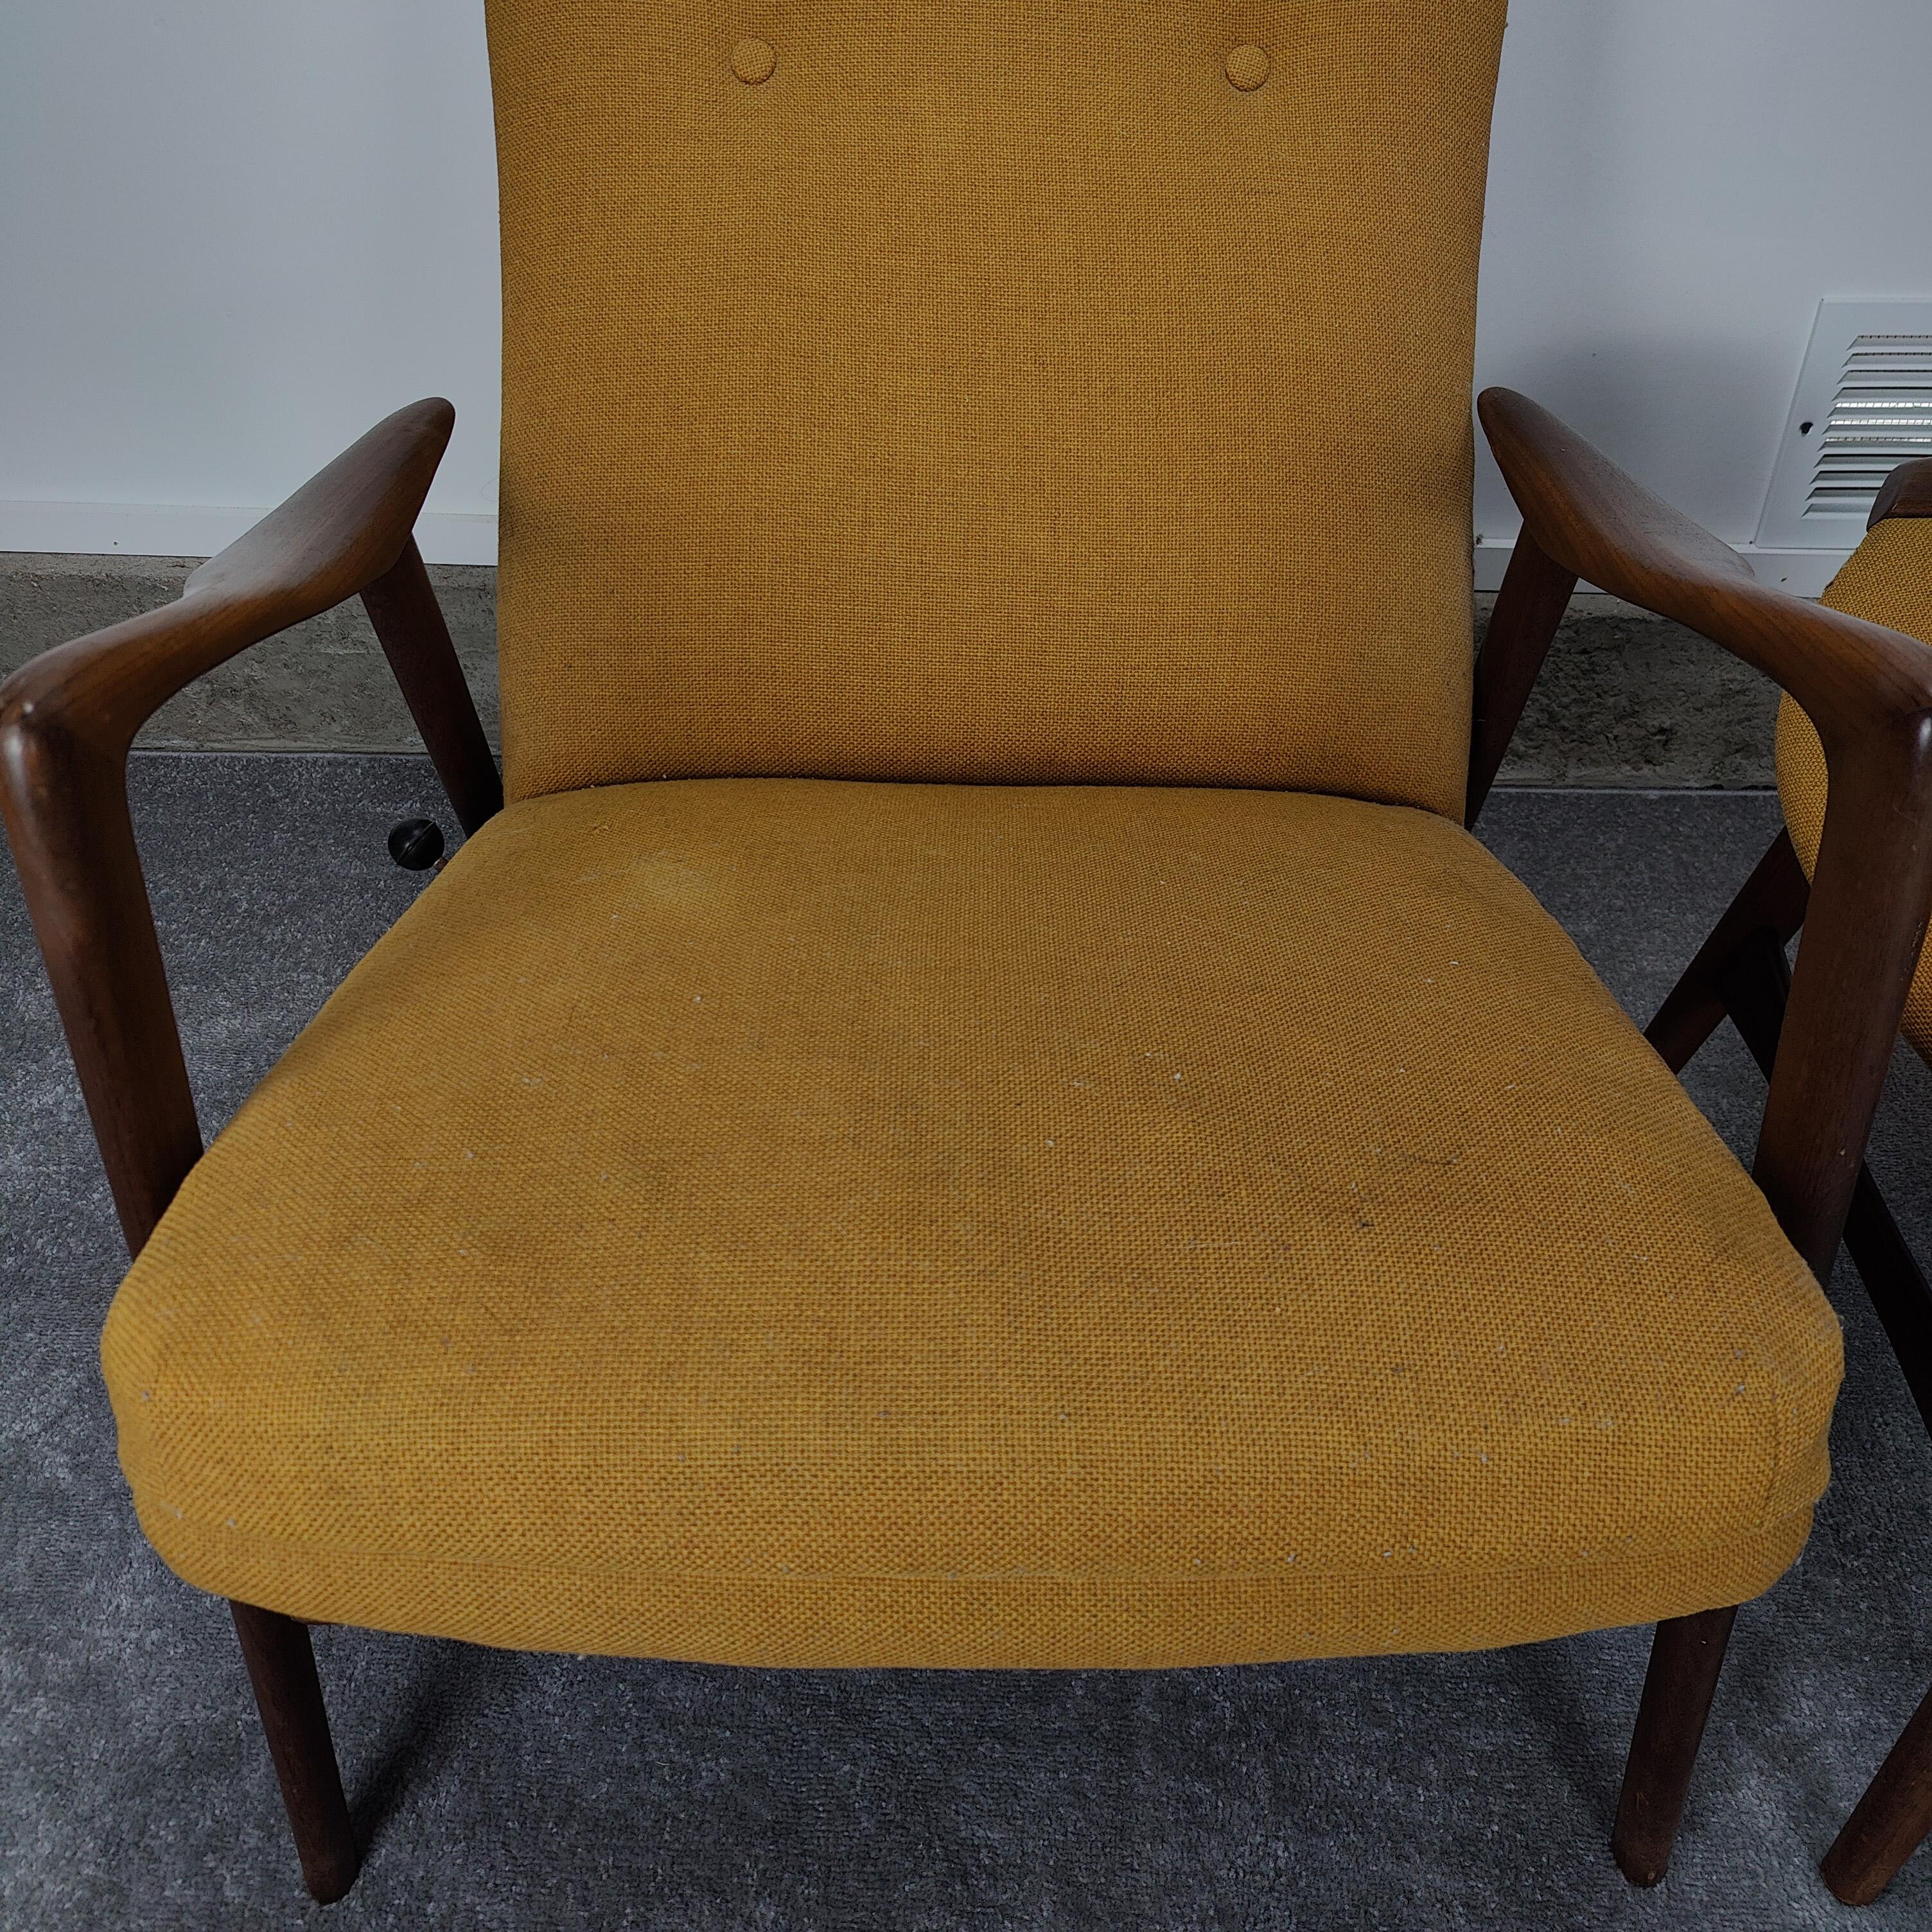 Vintage Midcentury Lounge Chair W/ Ottoman by Arnt Lande for Stokke Fabrikker 3